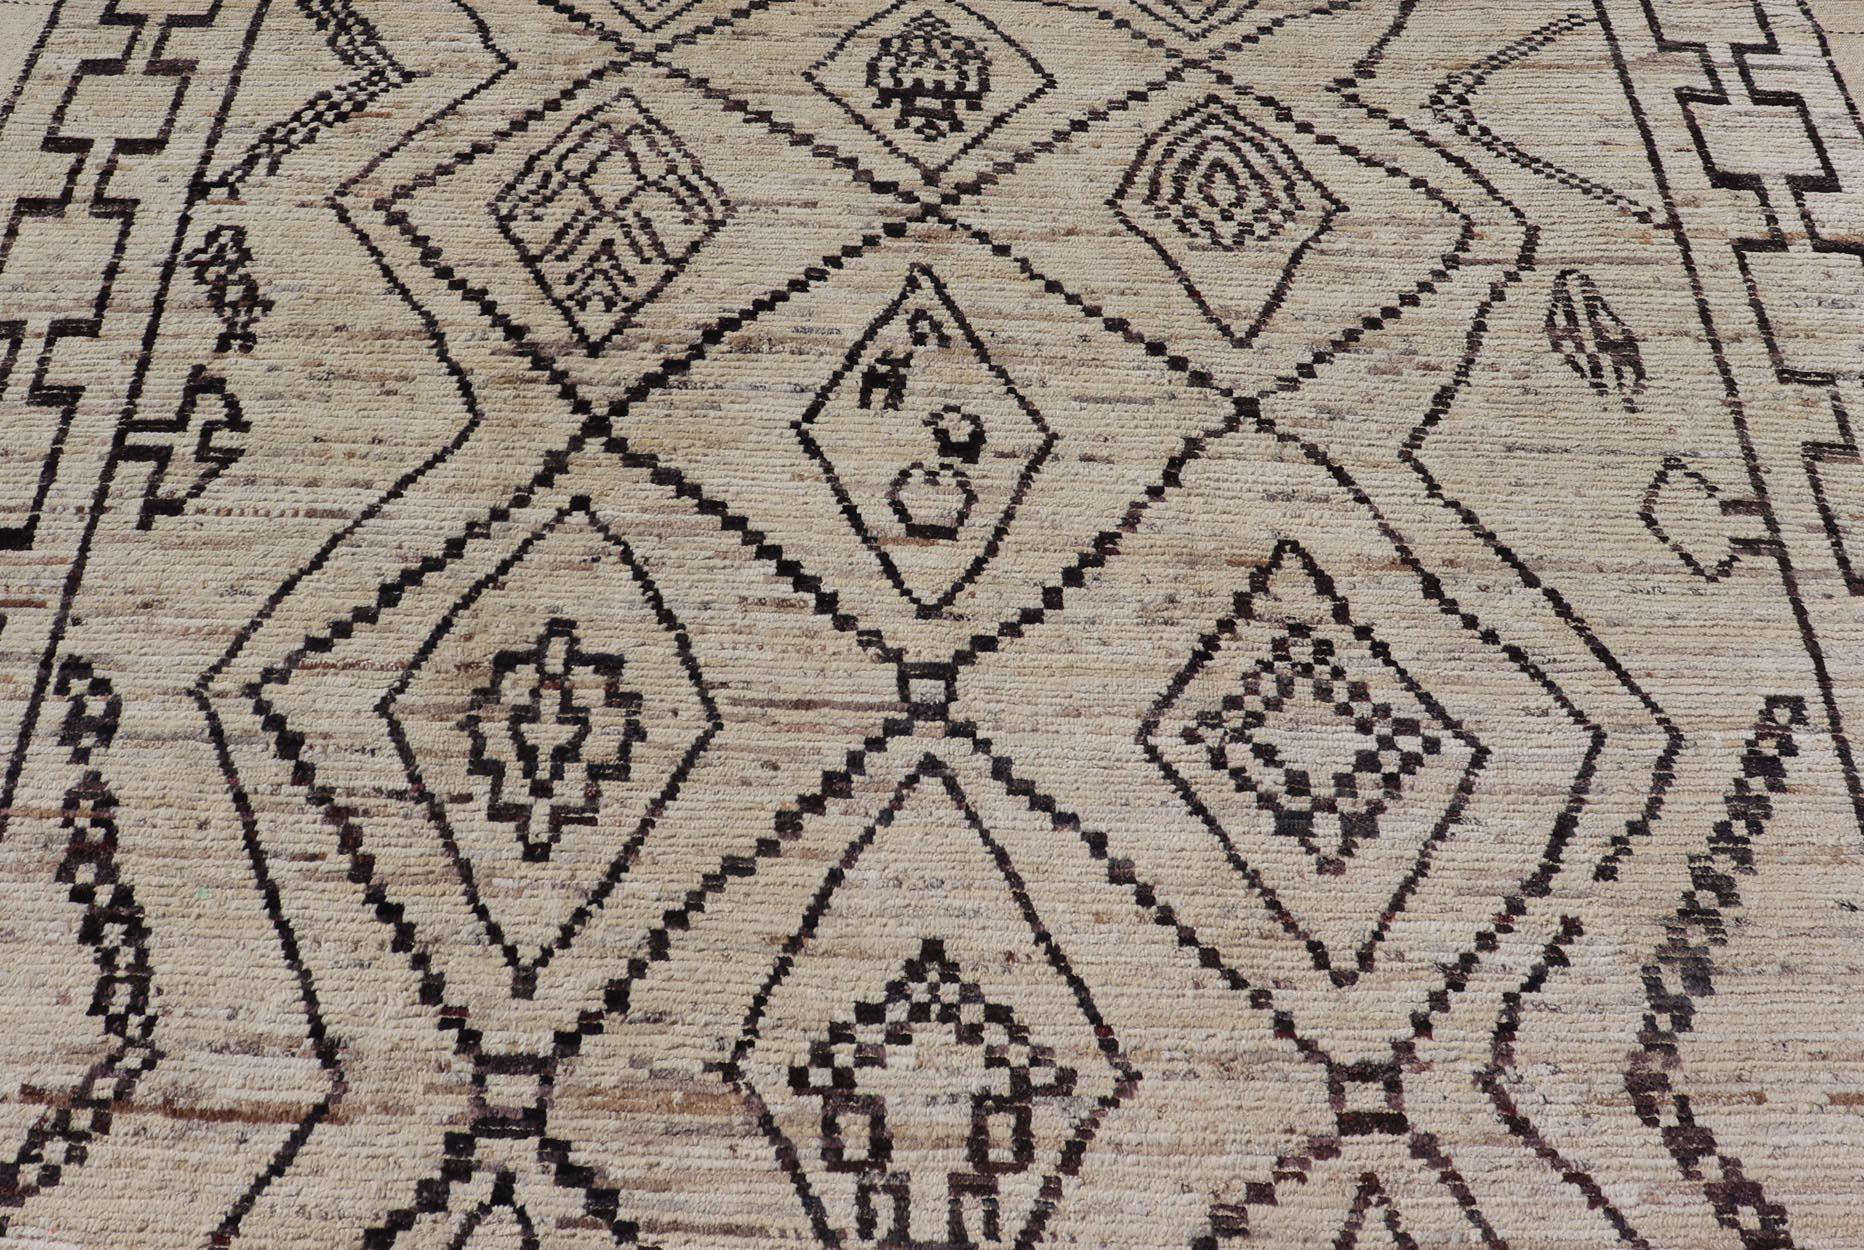 The design of the rug includes a series of interconnected diamond shapes, each containing different motifs such as crosses, zigzags, and other stylized symbols. The central theme is a grid of diamond patterns that vary slightly in size and detail,